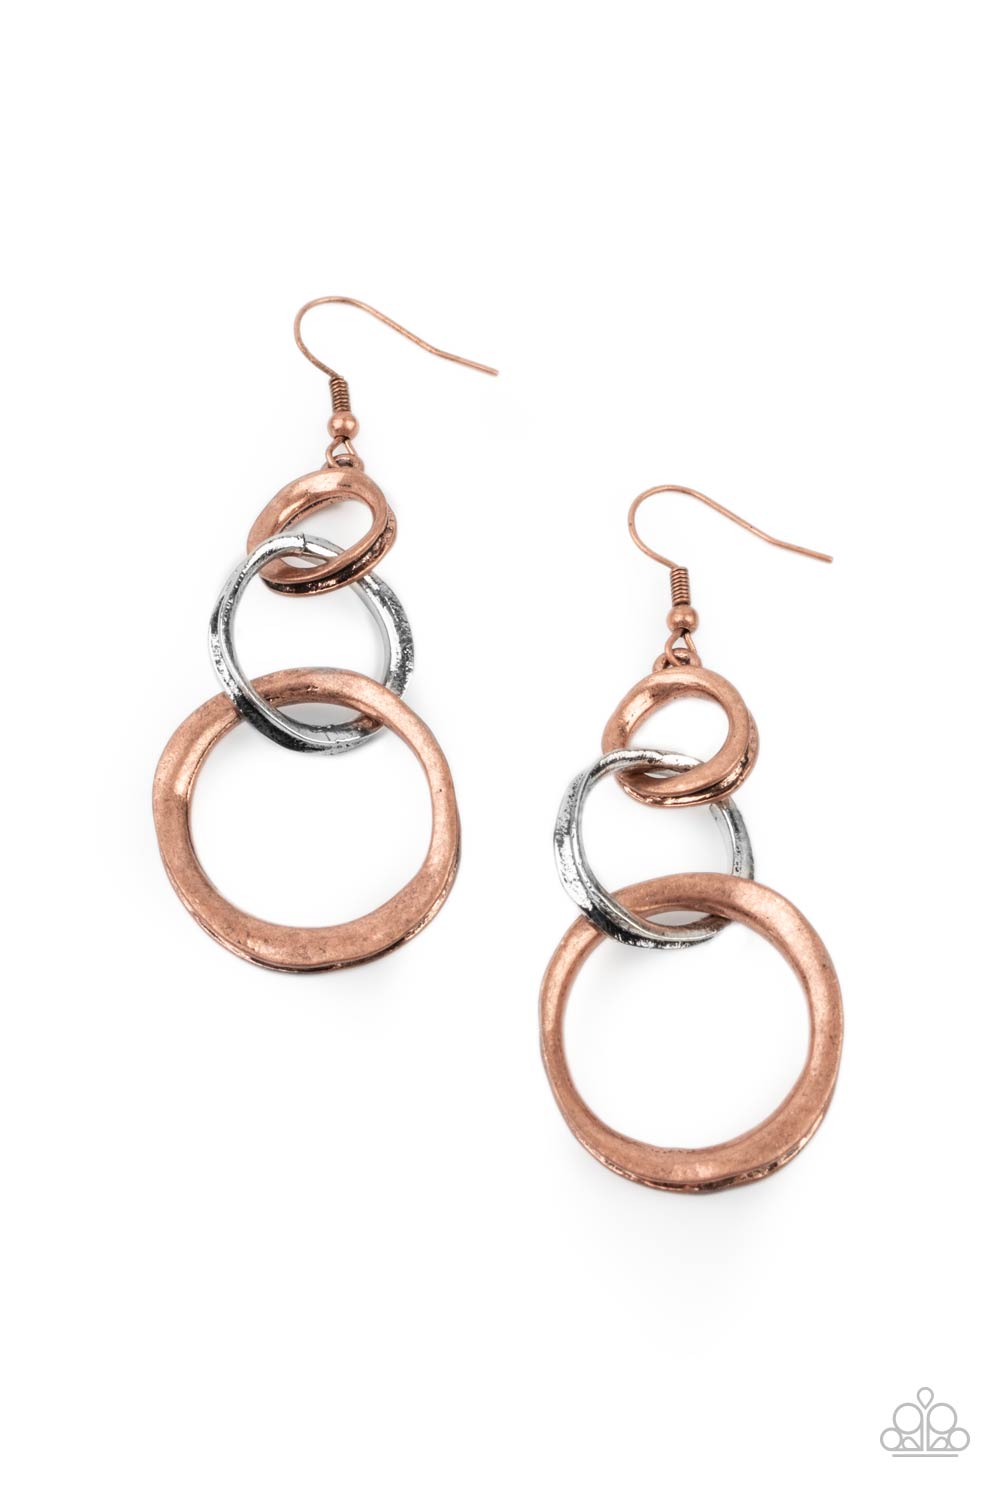 Harmoniously Handcrafted-Copper - Pretykimsbling